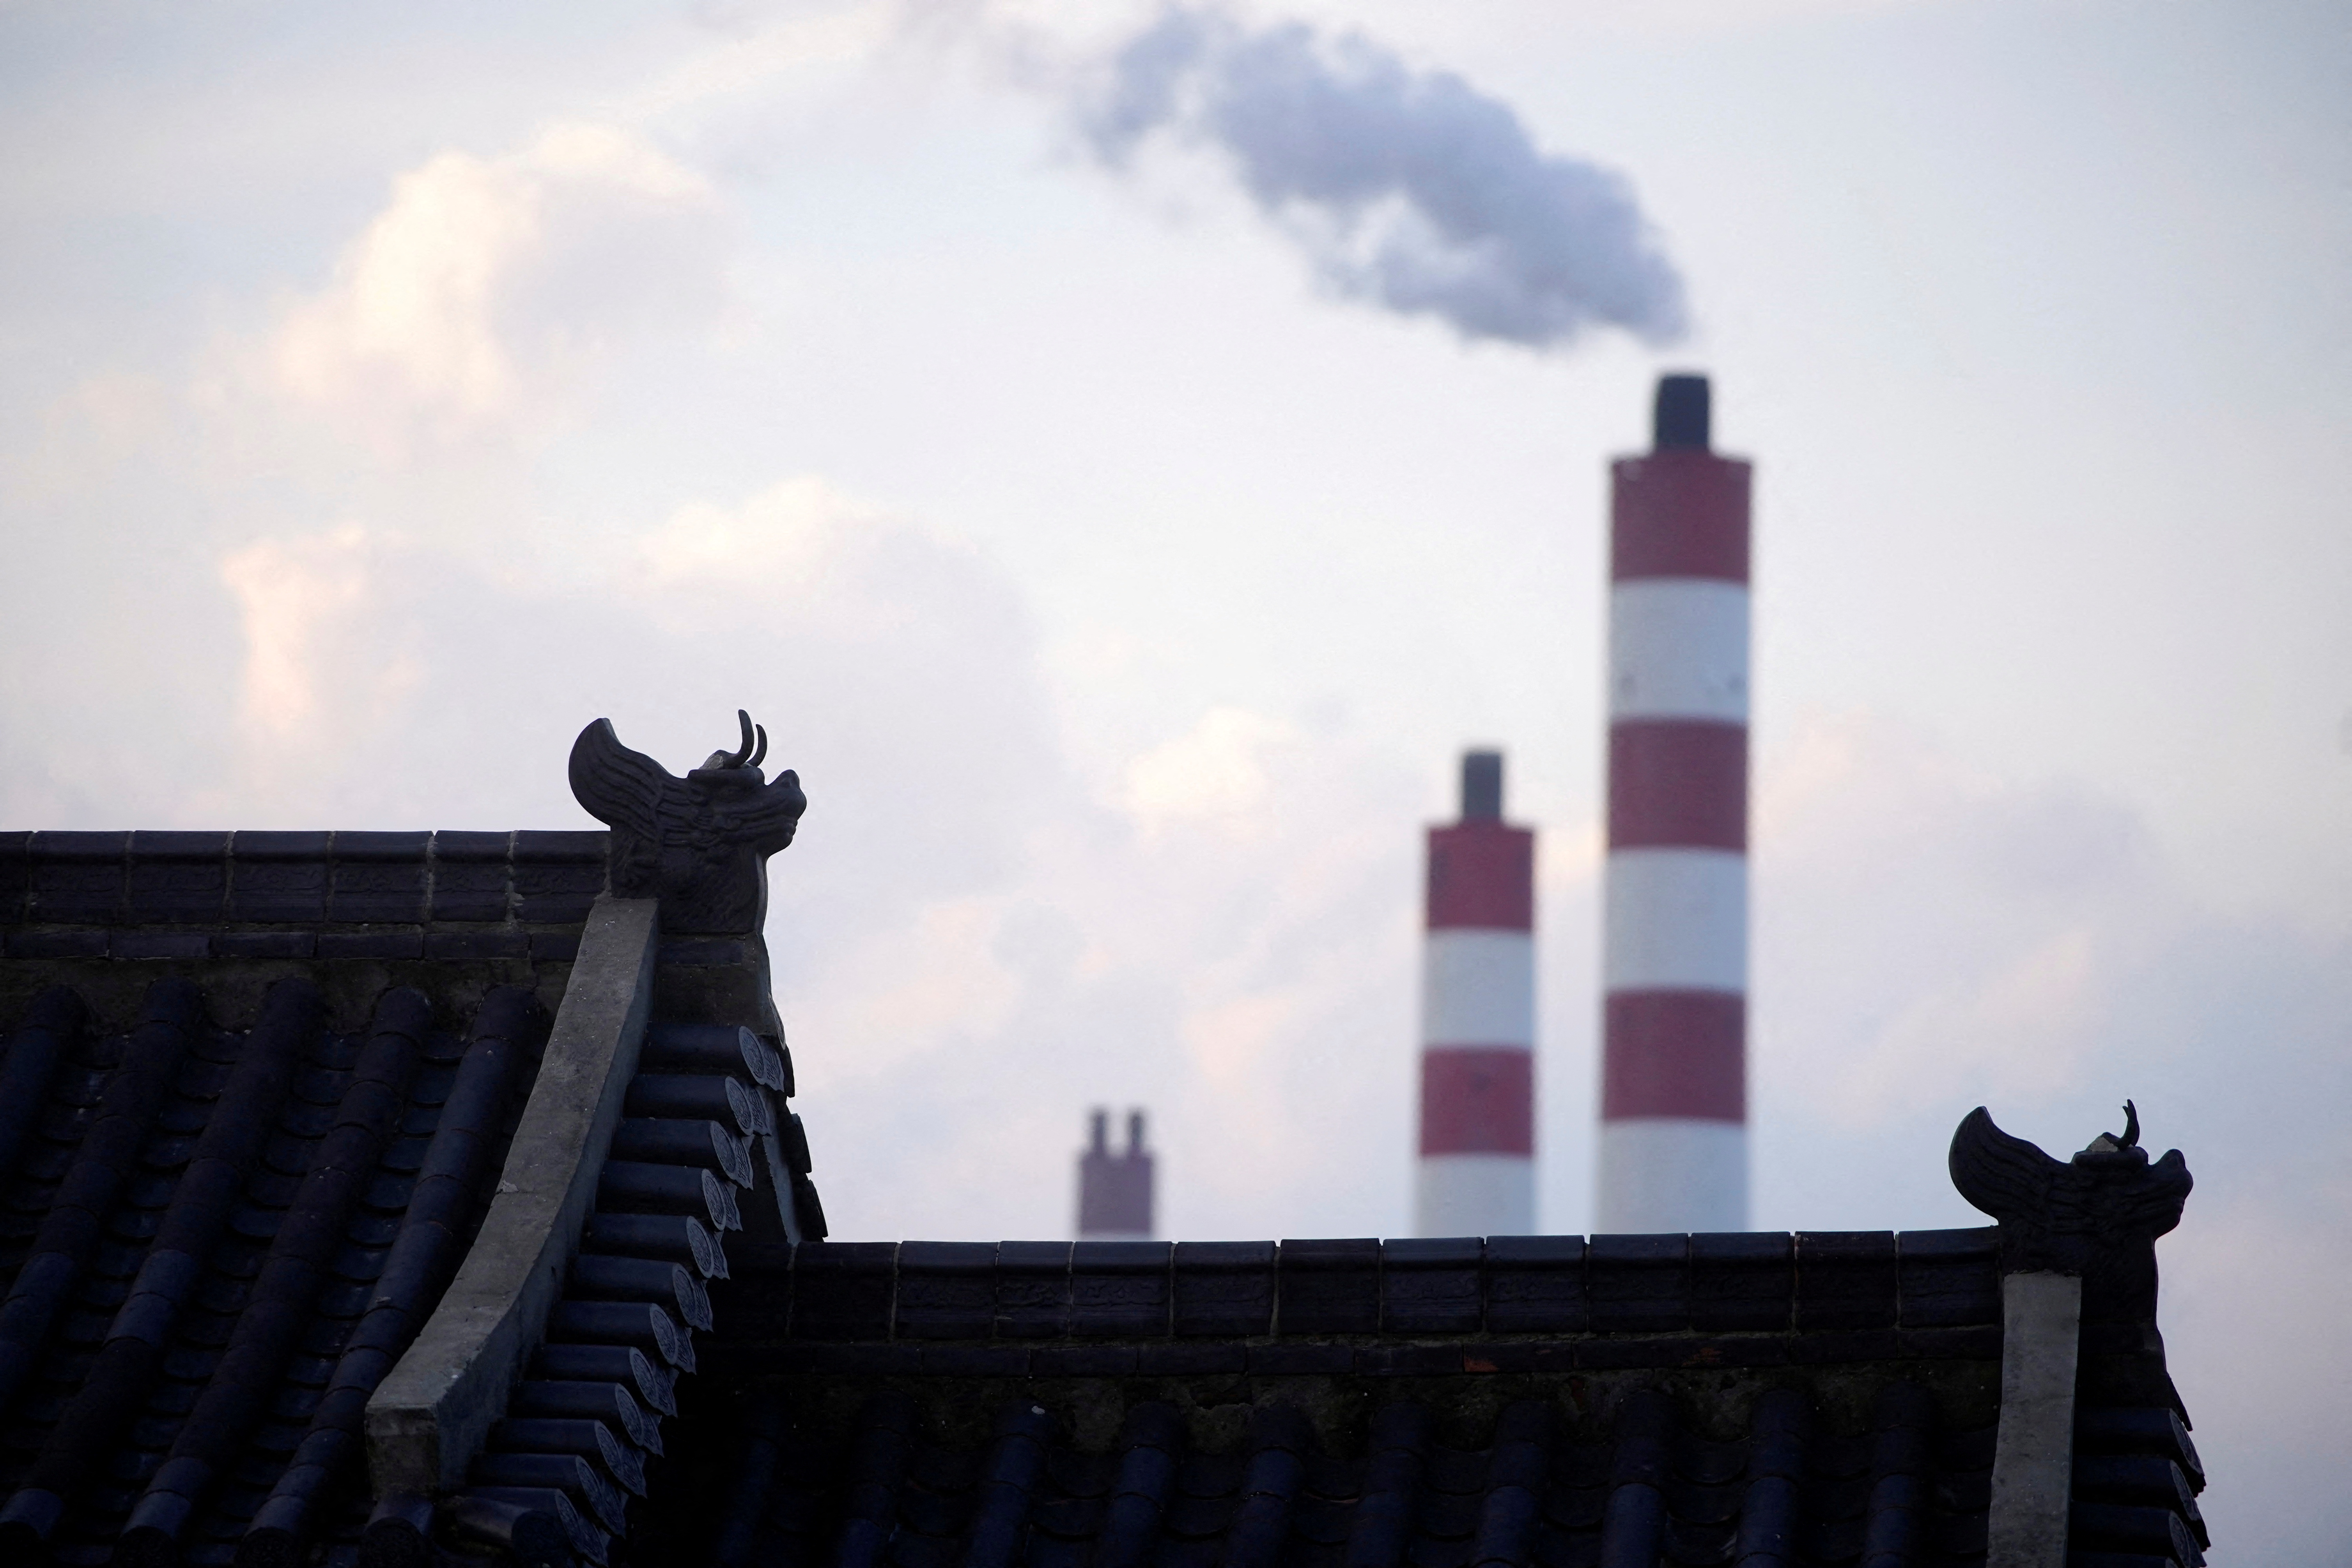 Chimneys of a coal-fired power plant are seen behind a gate in Shanghai, China October 21, 2021. REUTERS/Aly Song/File Photo